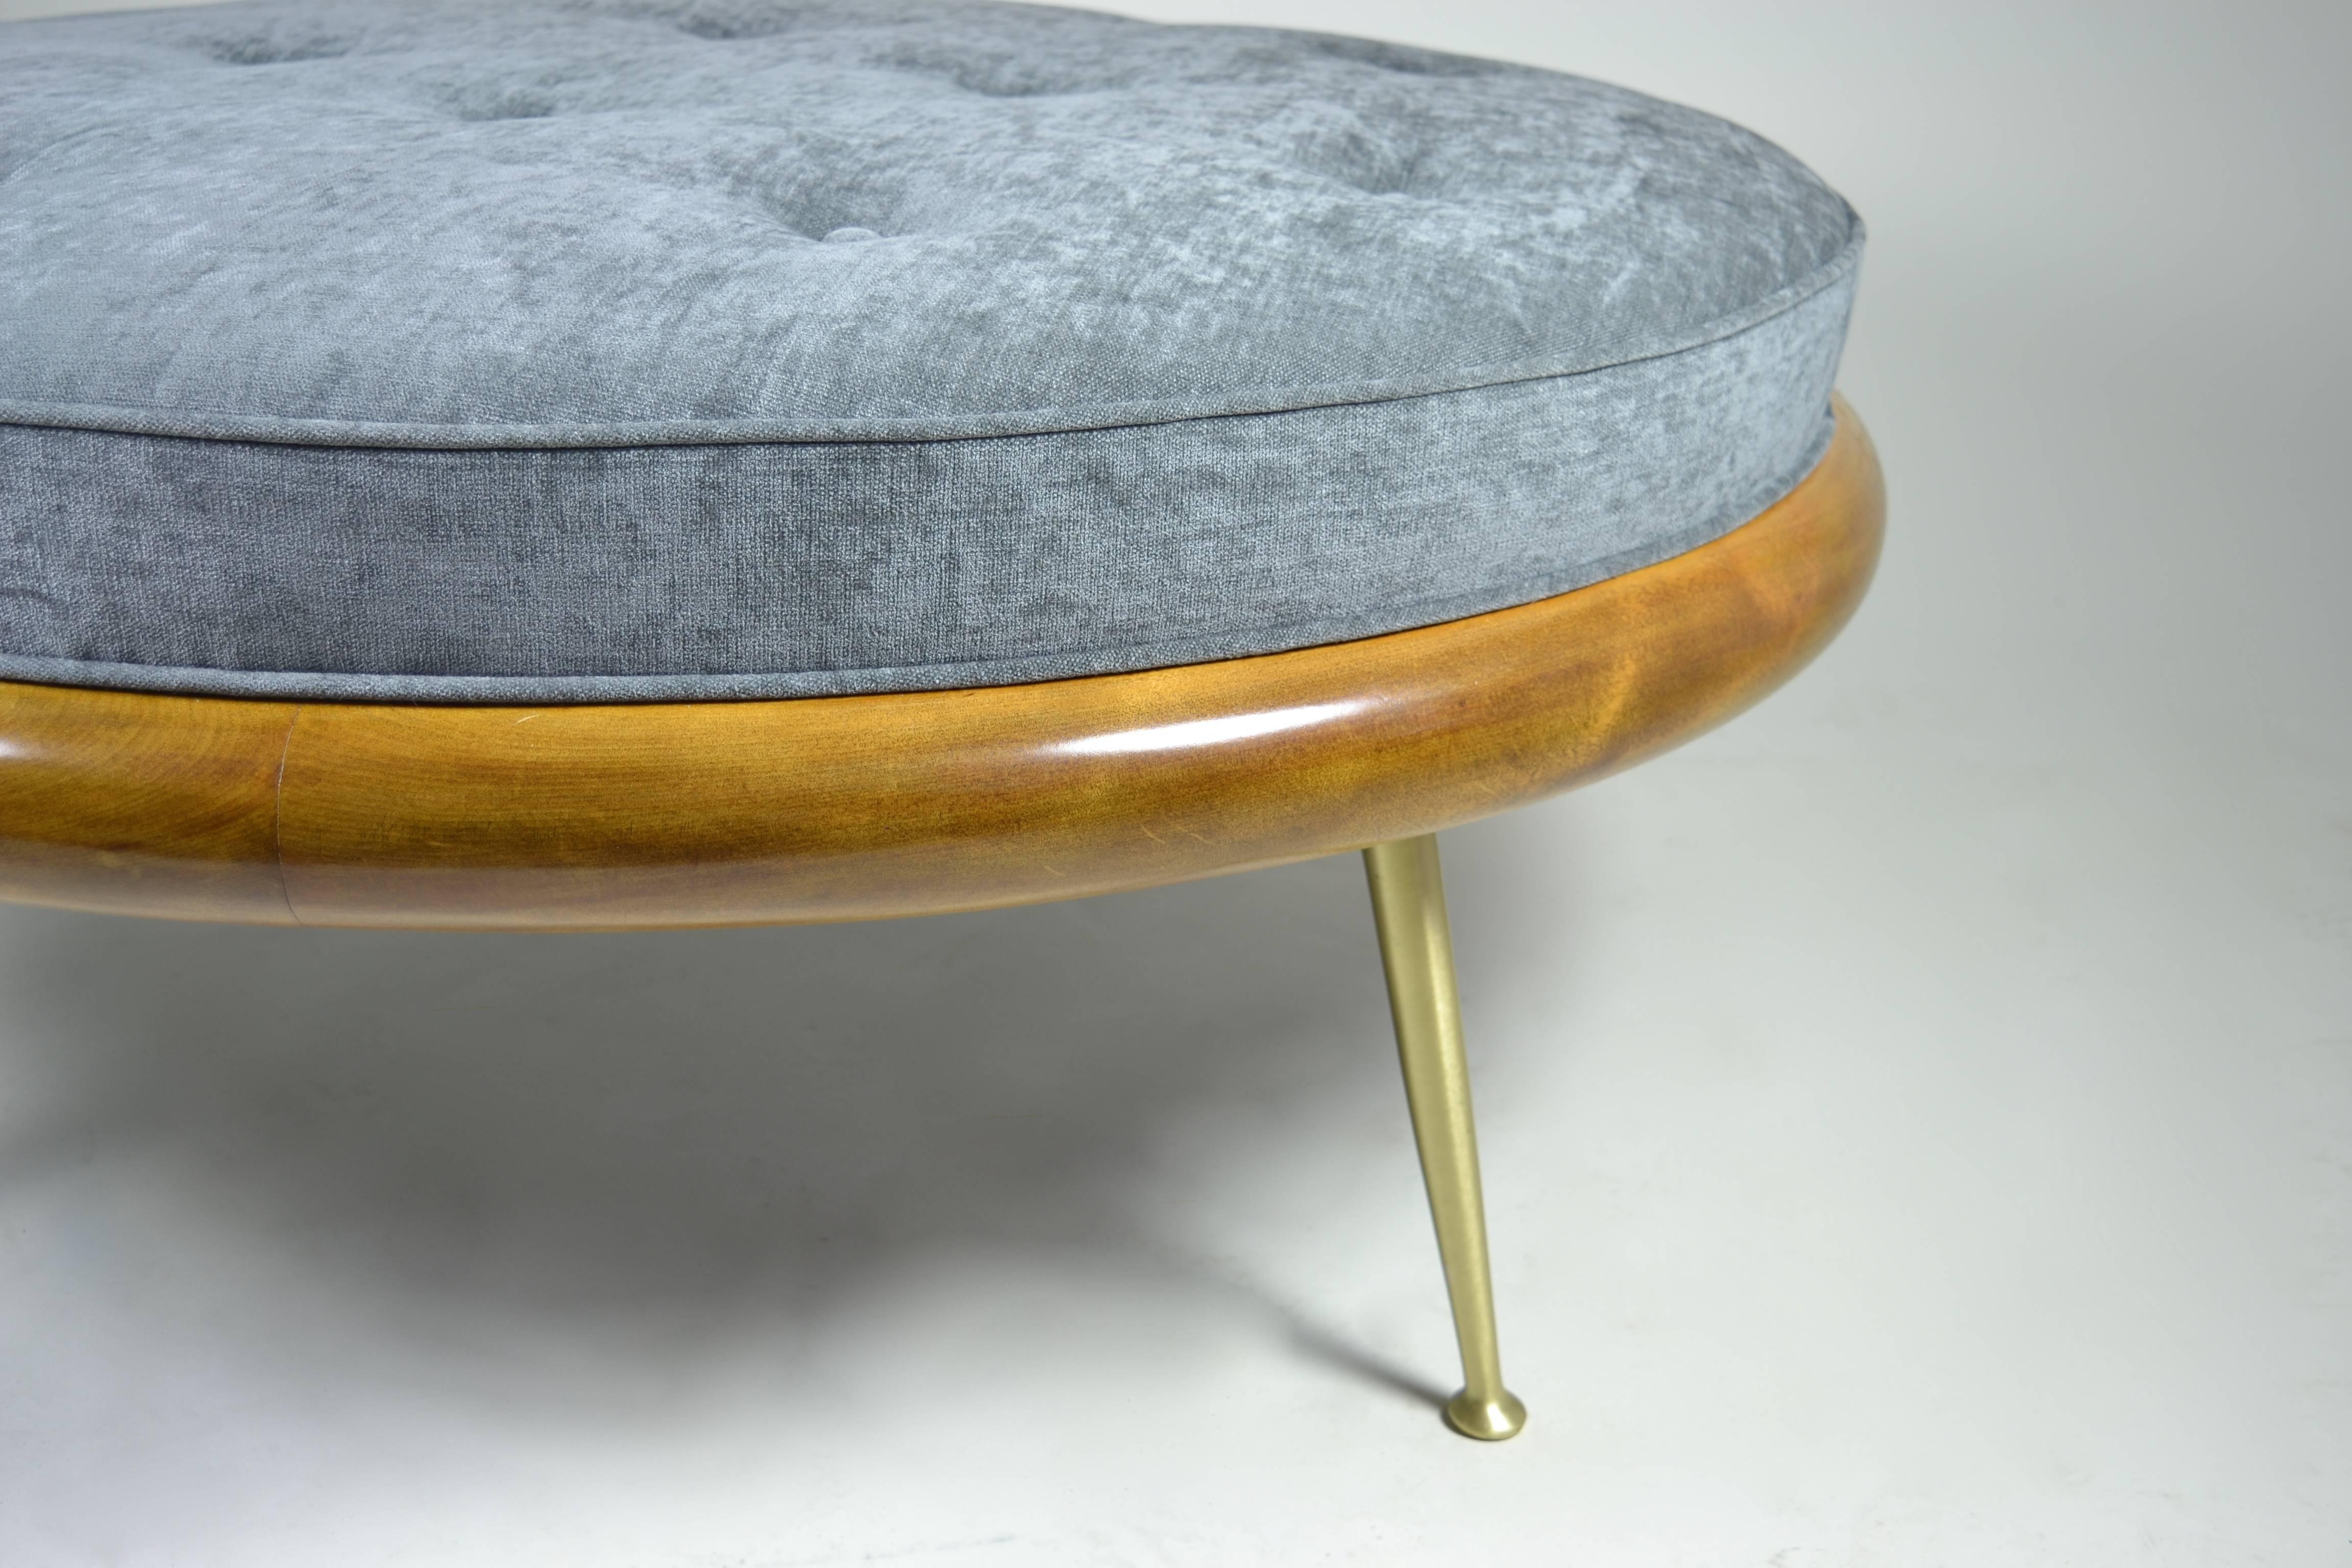 Designed by Terence Harold Robsjohn-Gibbings for Widdicomb Furniture Company, circa 1950. Satin polished solid brass legs, solid walnut. Button detailed upholstery in grey velvet. Excellent fully restored condition.